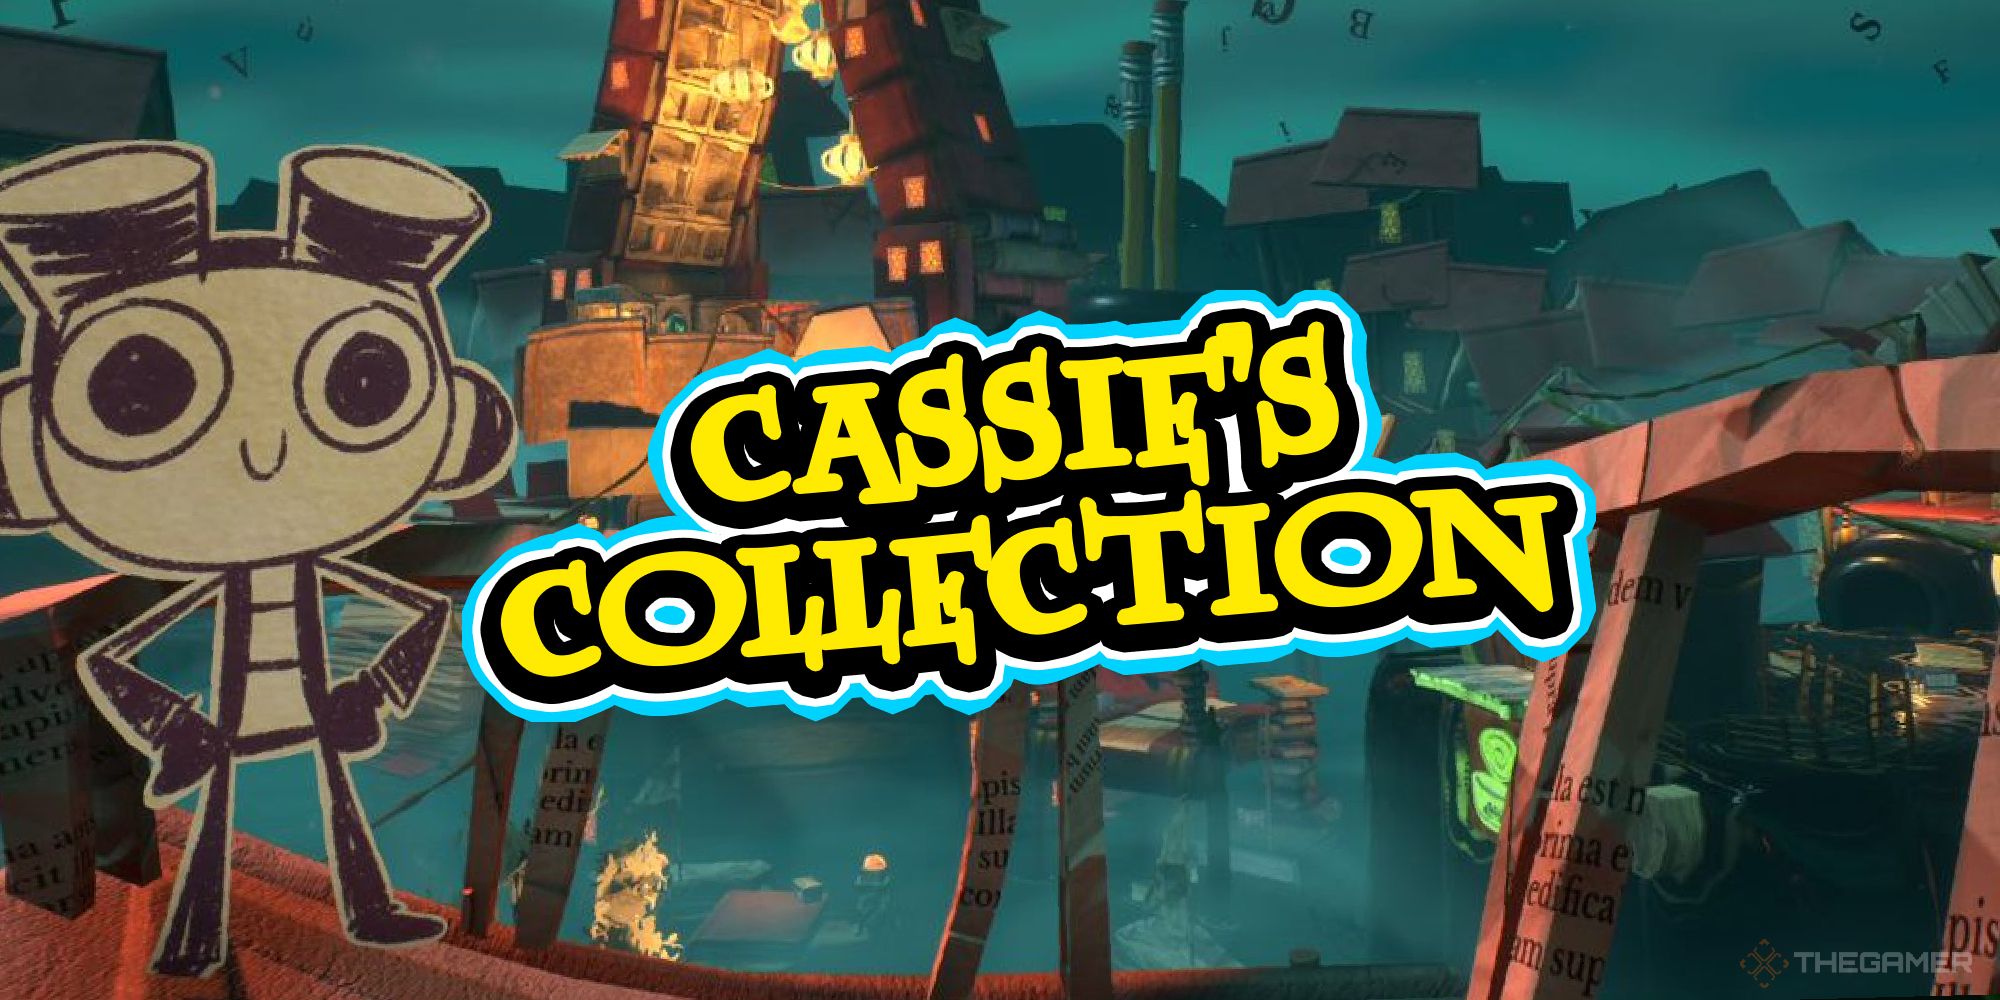 How To Find Every Collectible In Cassie S Collection In Psychonauts 2